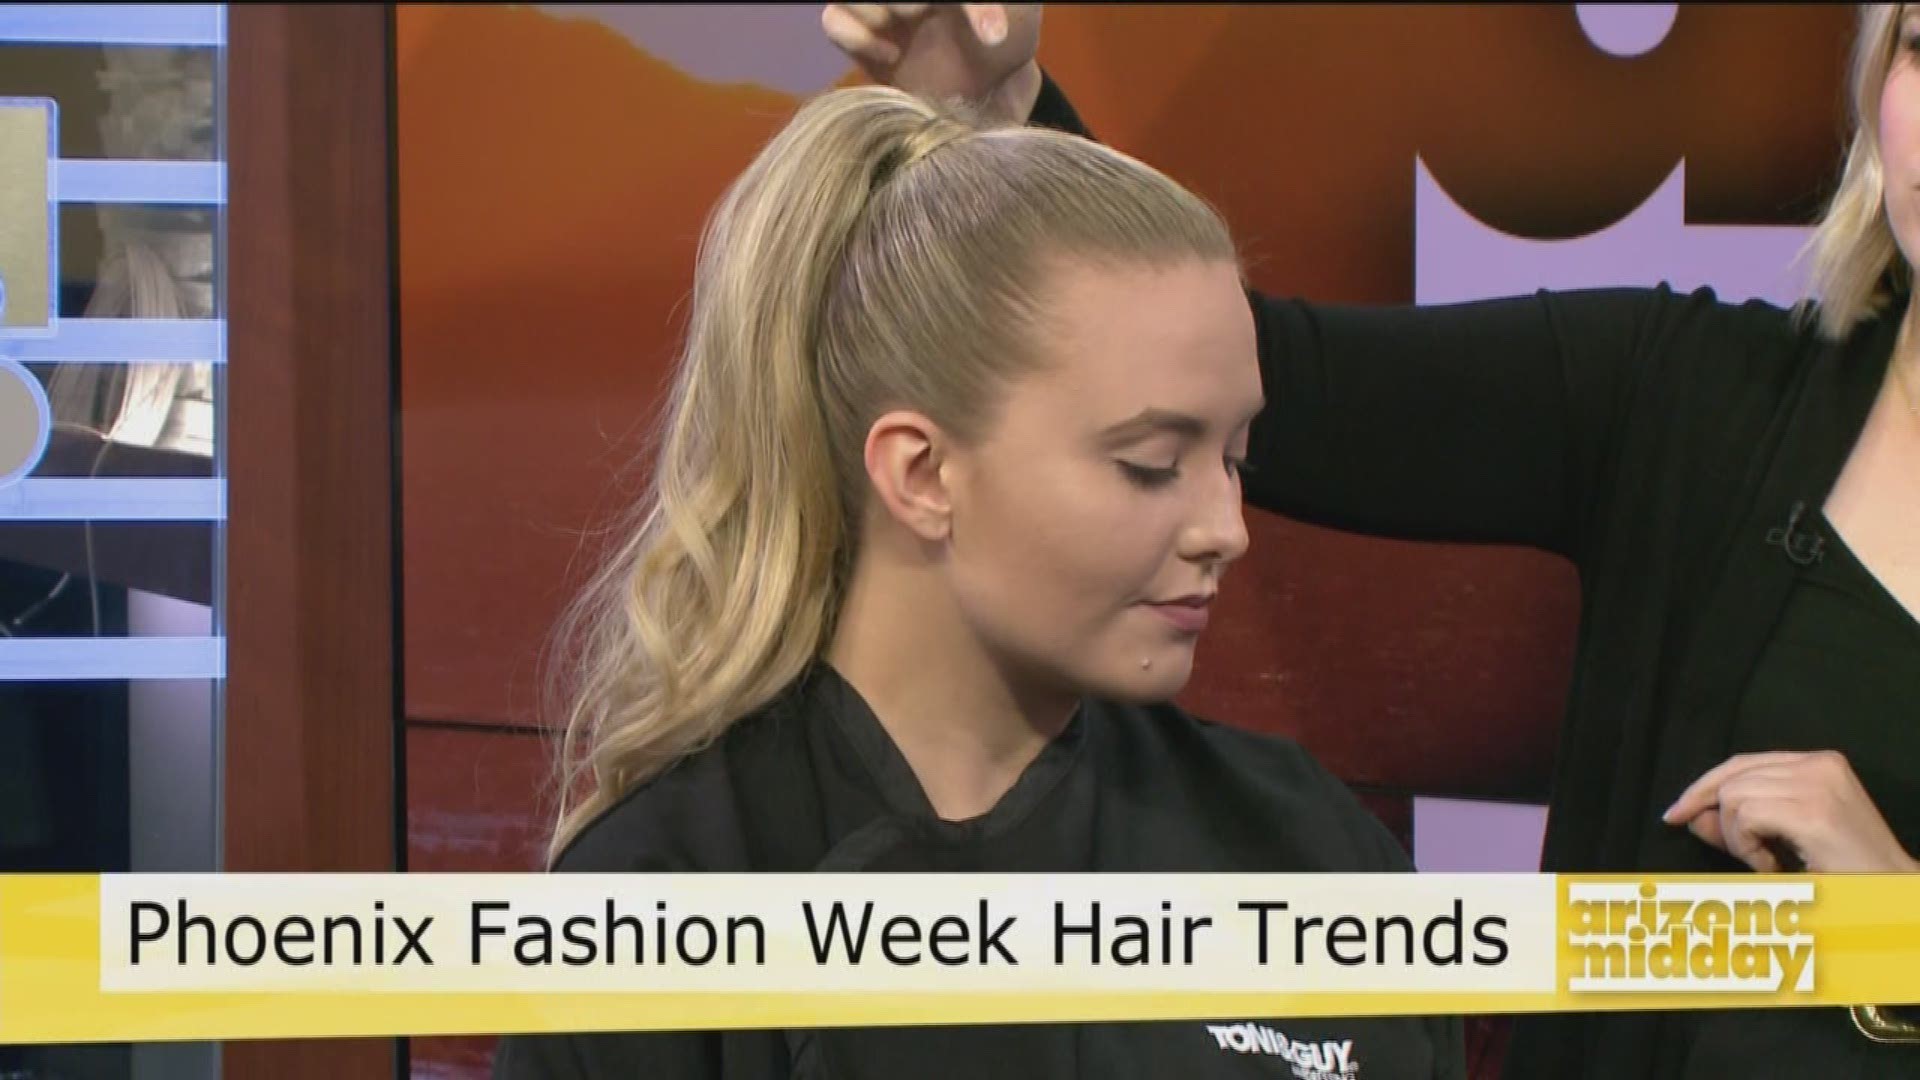 Jennifer from Toni & Guy shows us the top trends at the Phoenix Fashion Week and how to recreate some of the looks!